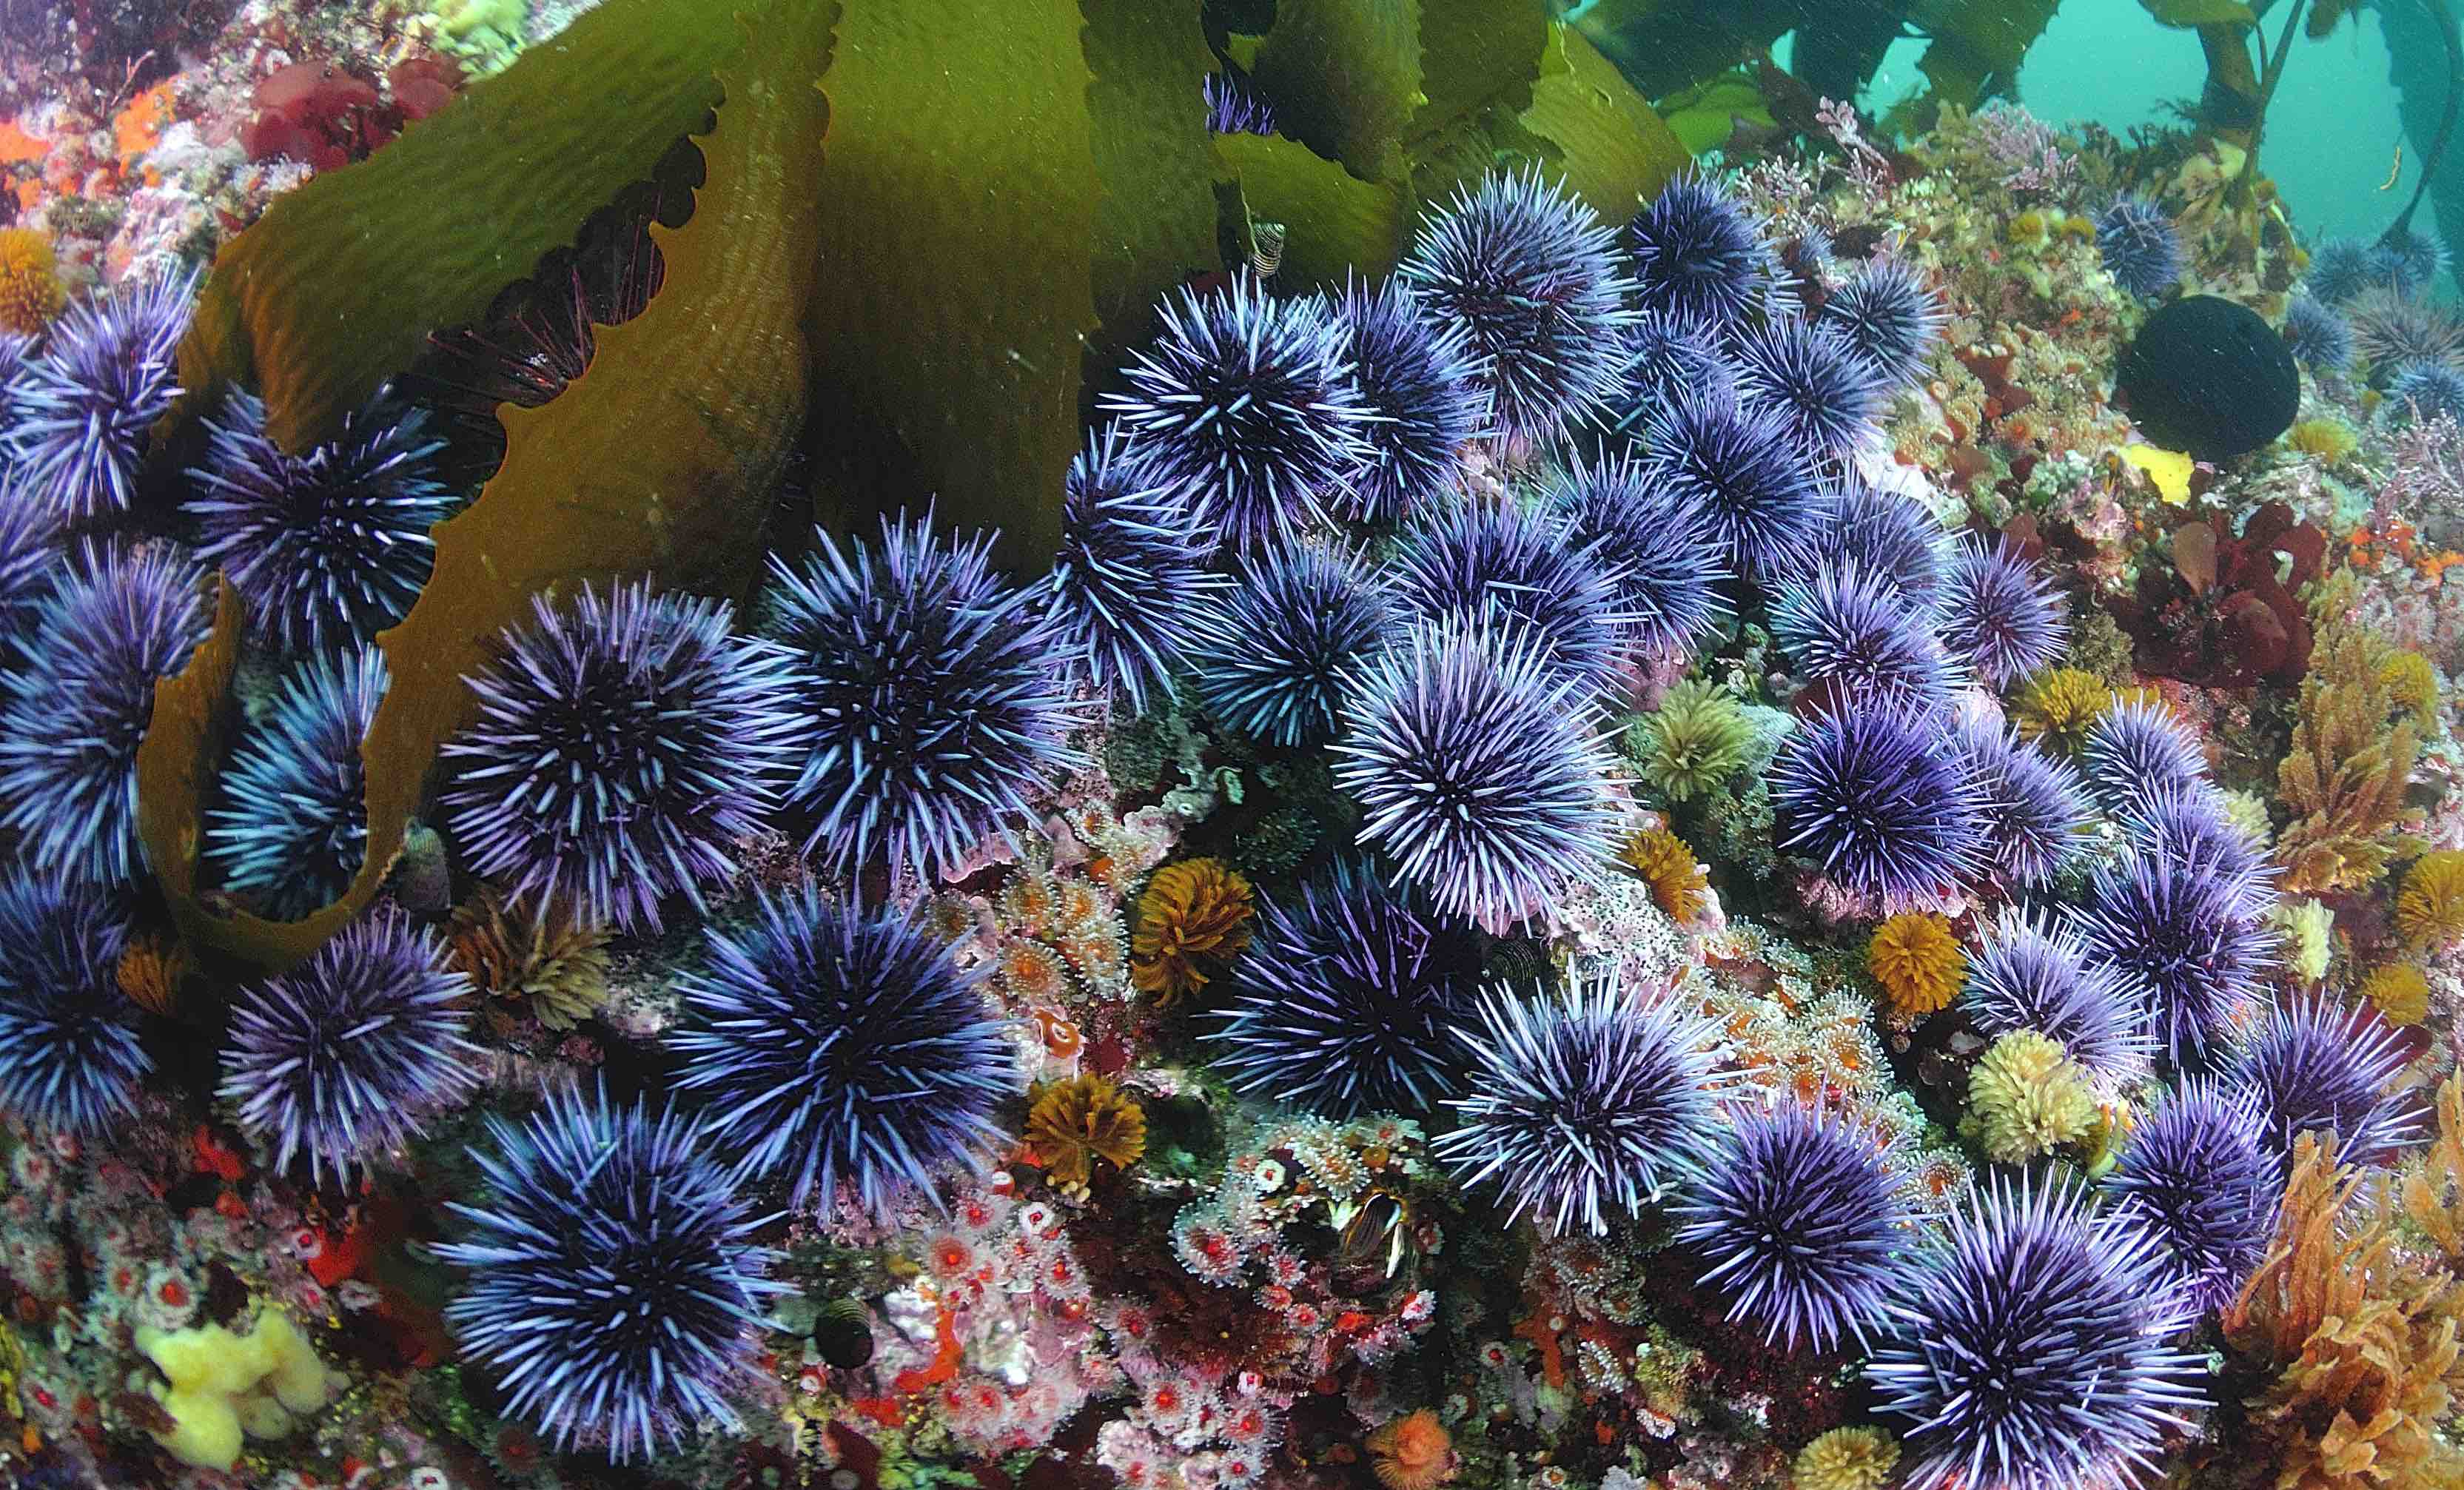 40 Sea Urchin Facts About These Spiky Creatures | Facts.net